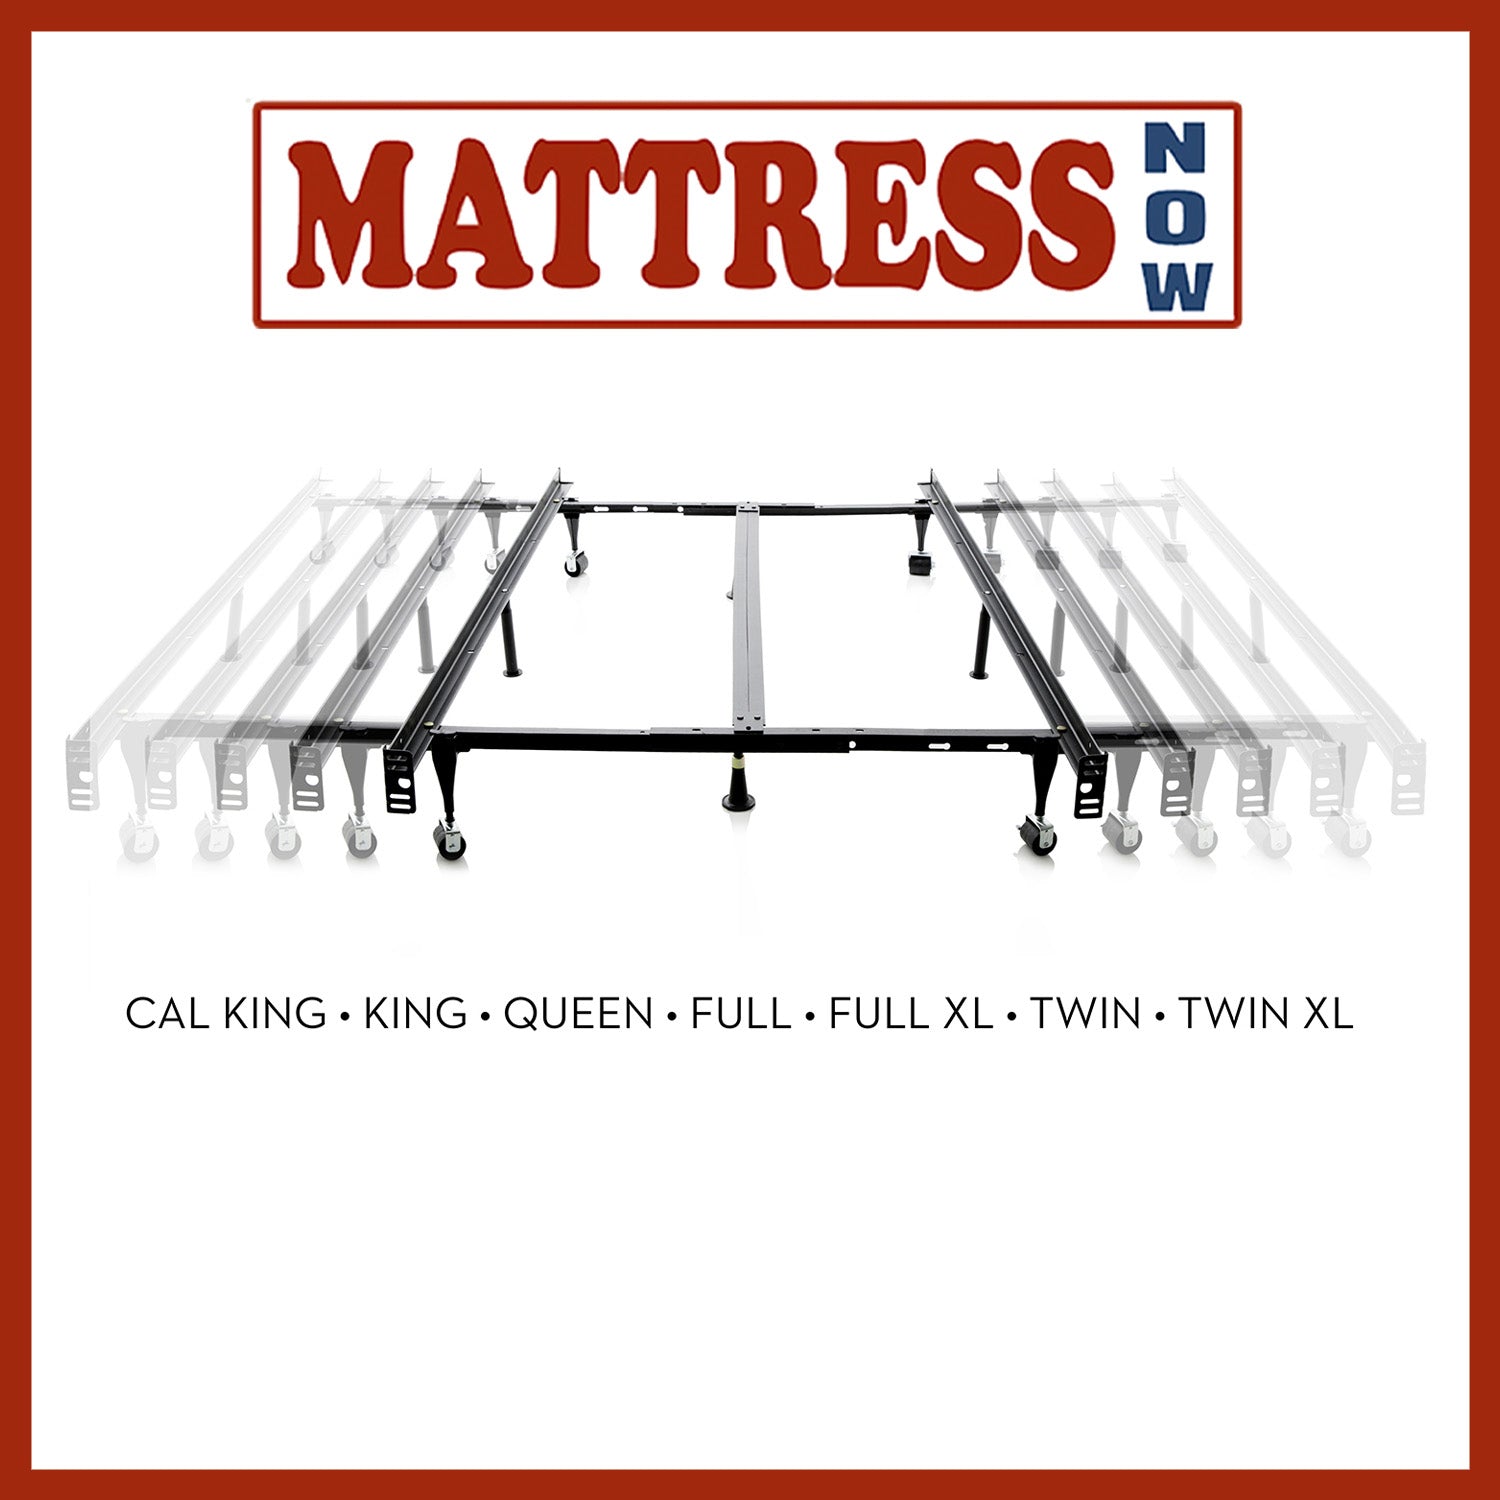 Mattress Now® King Universal Bed Frame with Headboard Attachment